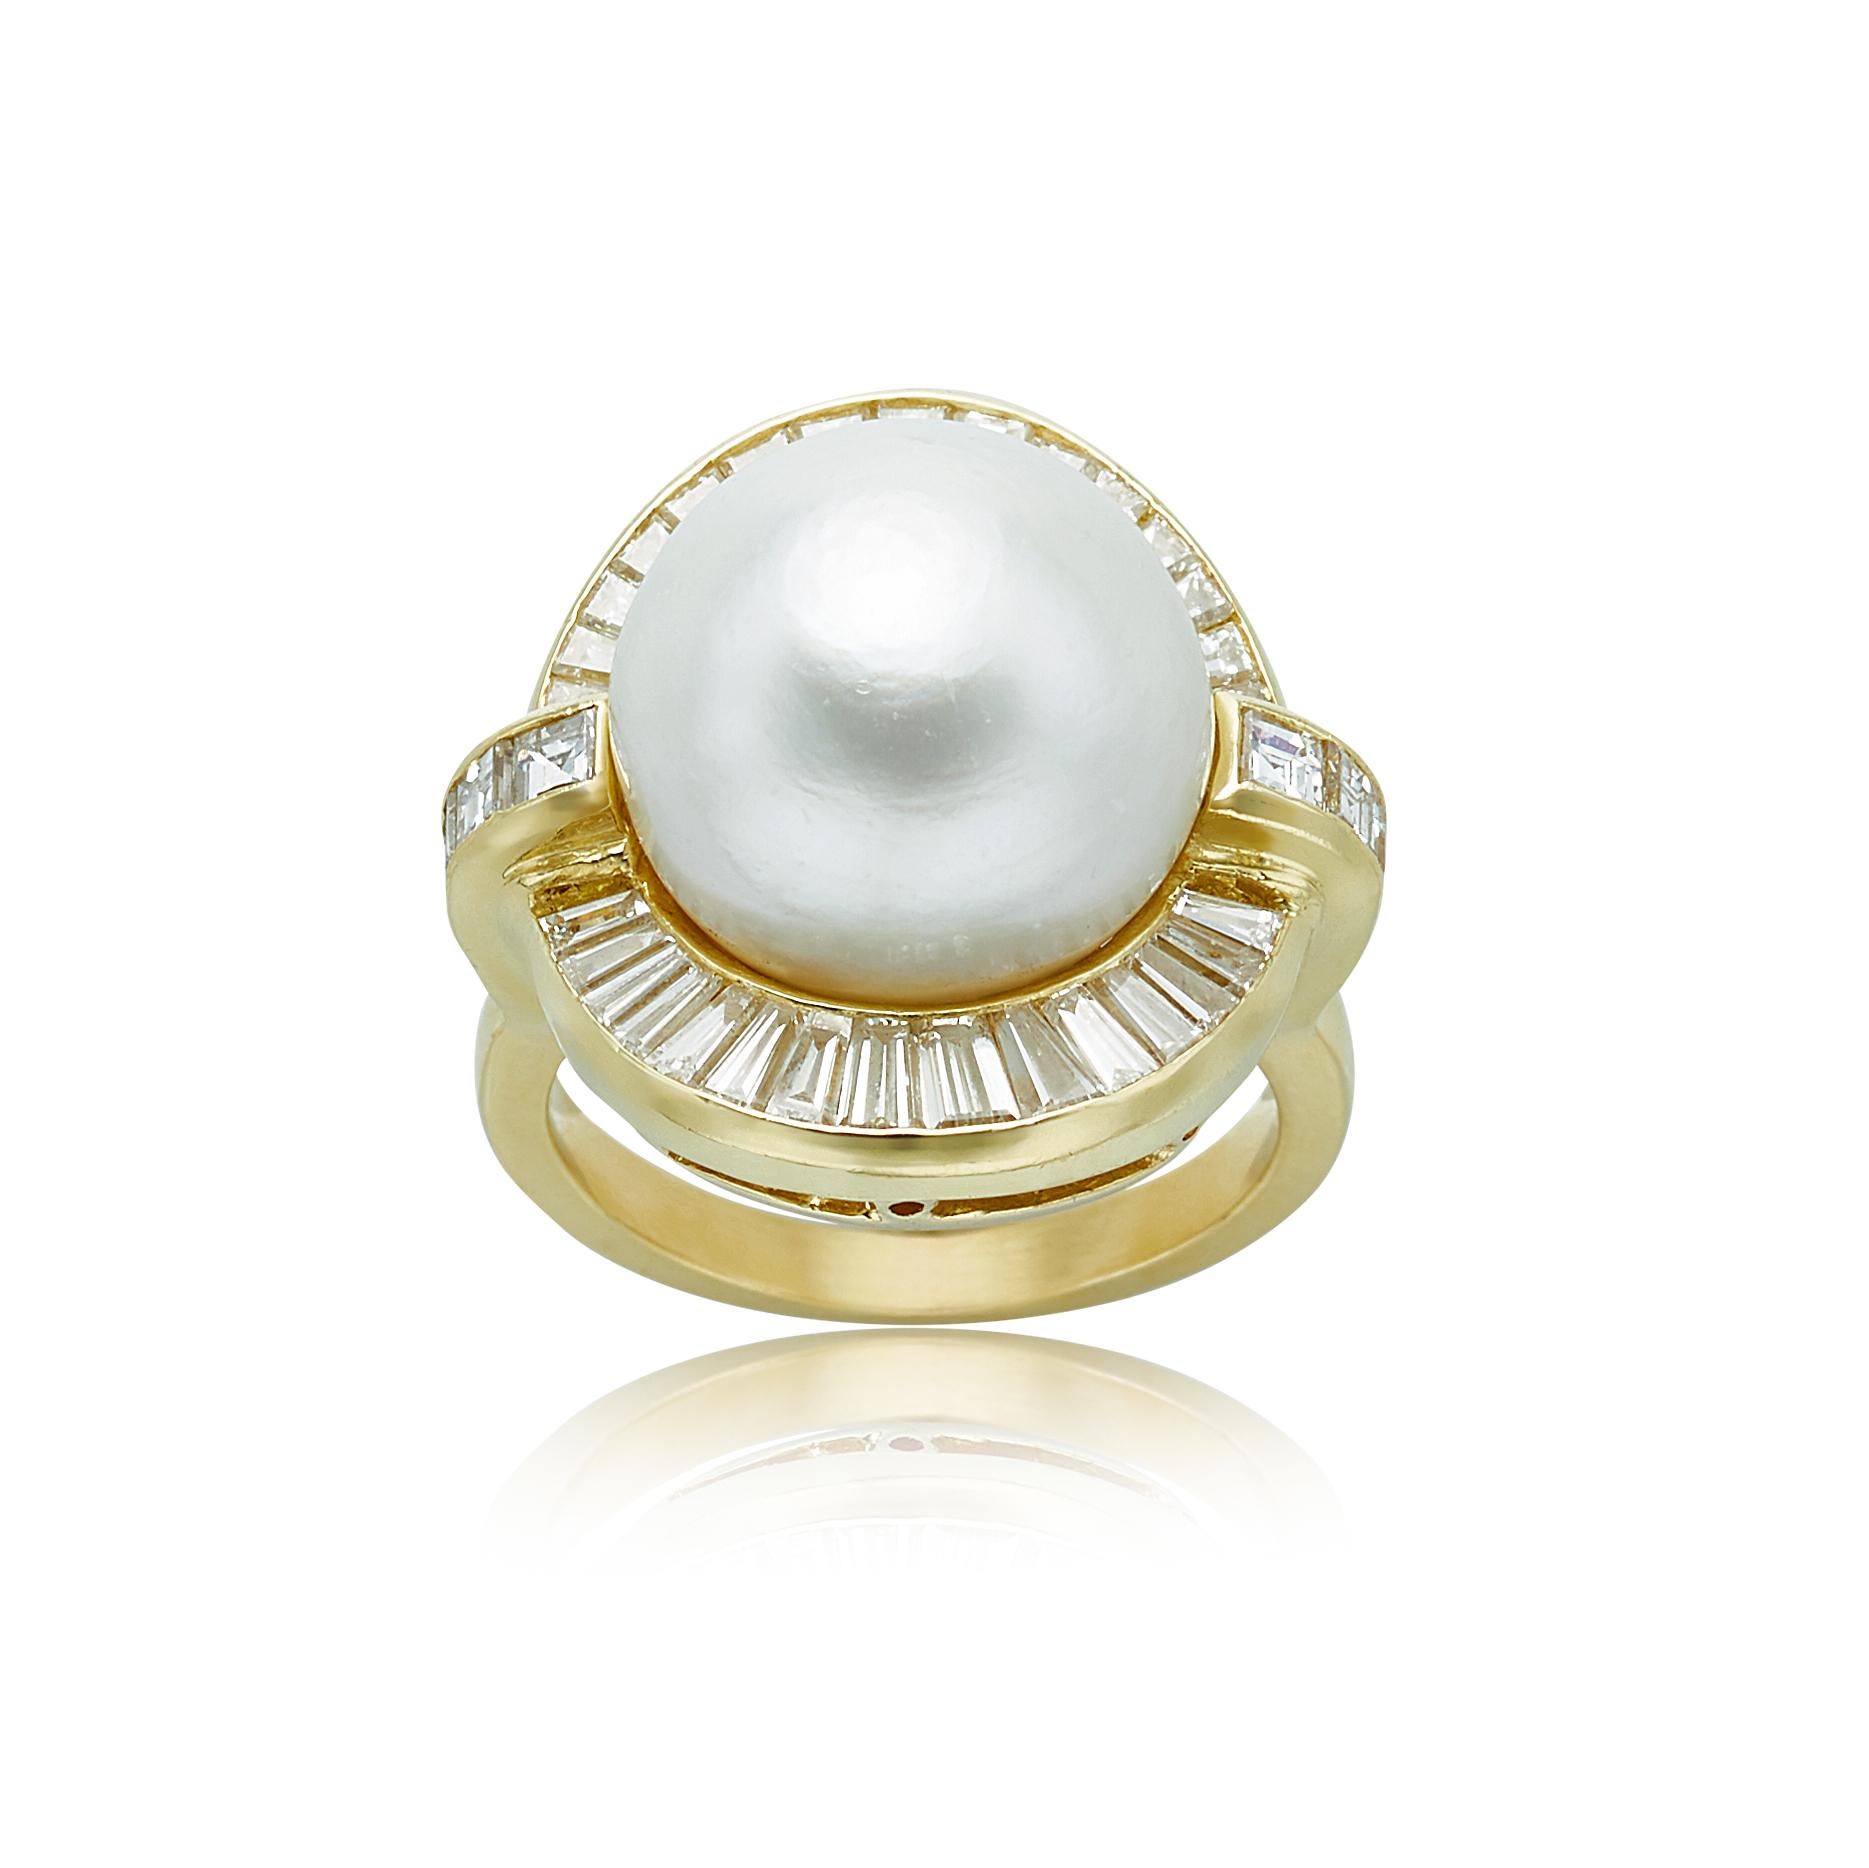 This 18k yellow gold ring features a pearl measuring at 13.5mm surrounded by 30 taper baguette cut diamonds, weighing 1.00 carats with G-H color and VS clarity. The ring is also paired with 10 square baguette cut diamonds, weighing 1.00 carats with